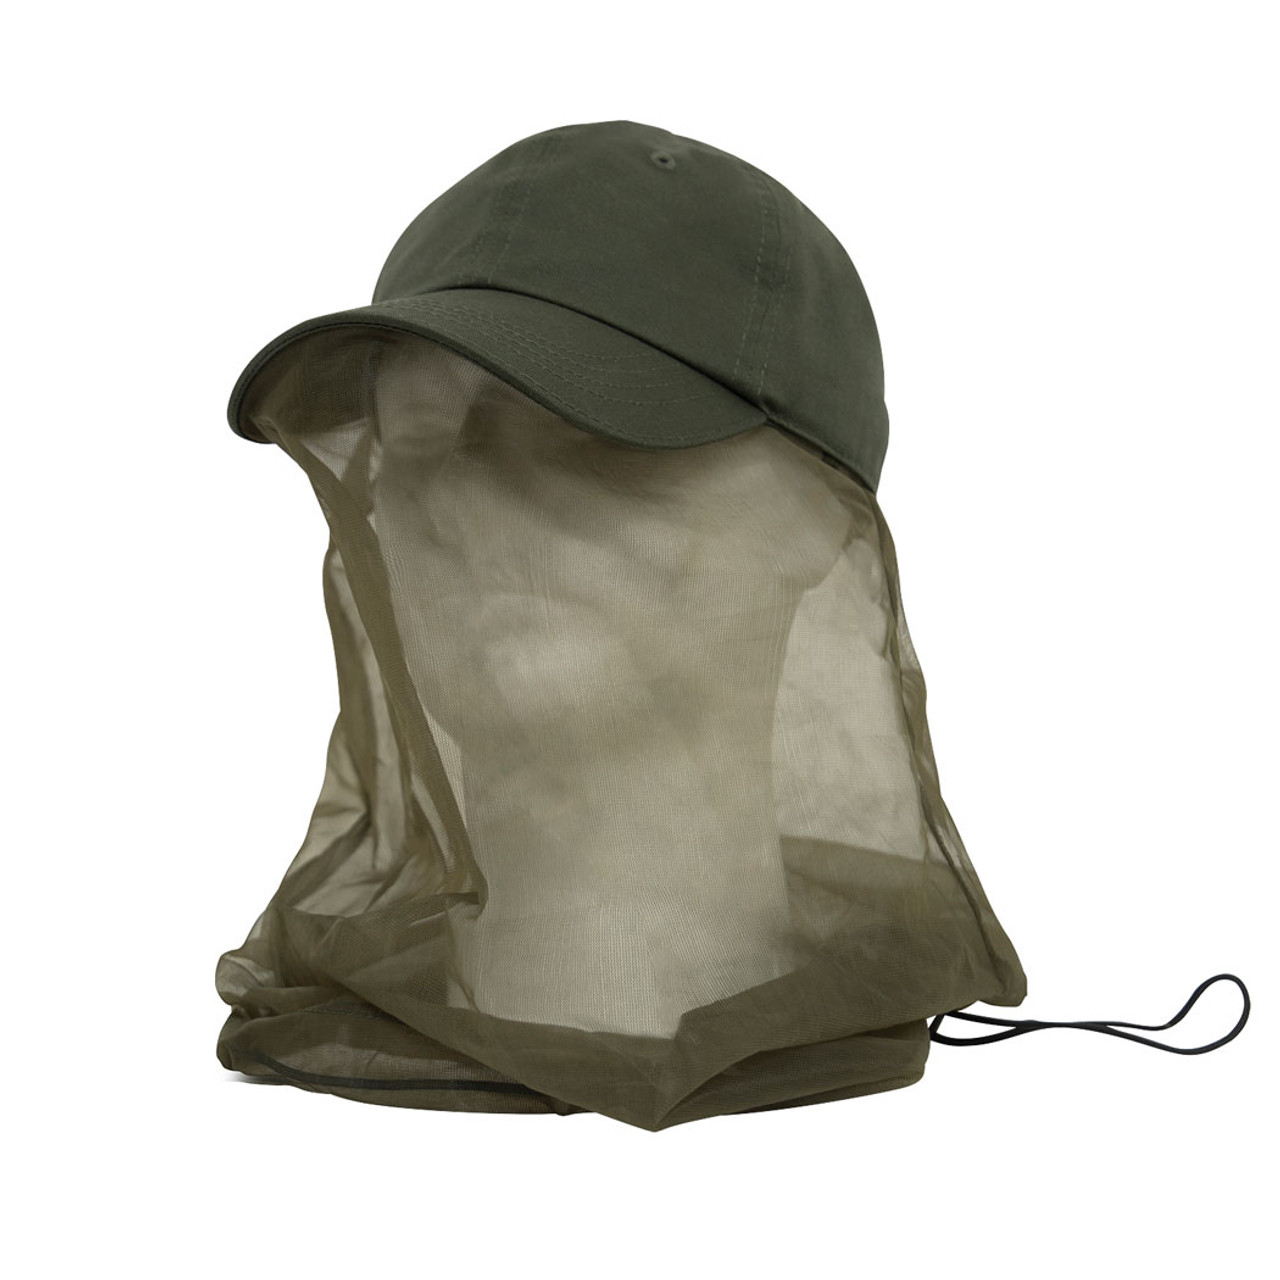 Shop Operator's Cap w/Mosquito Net - Fatigues Army Navy